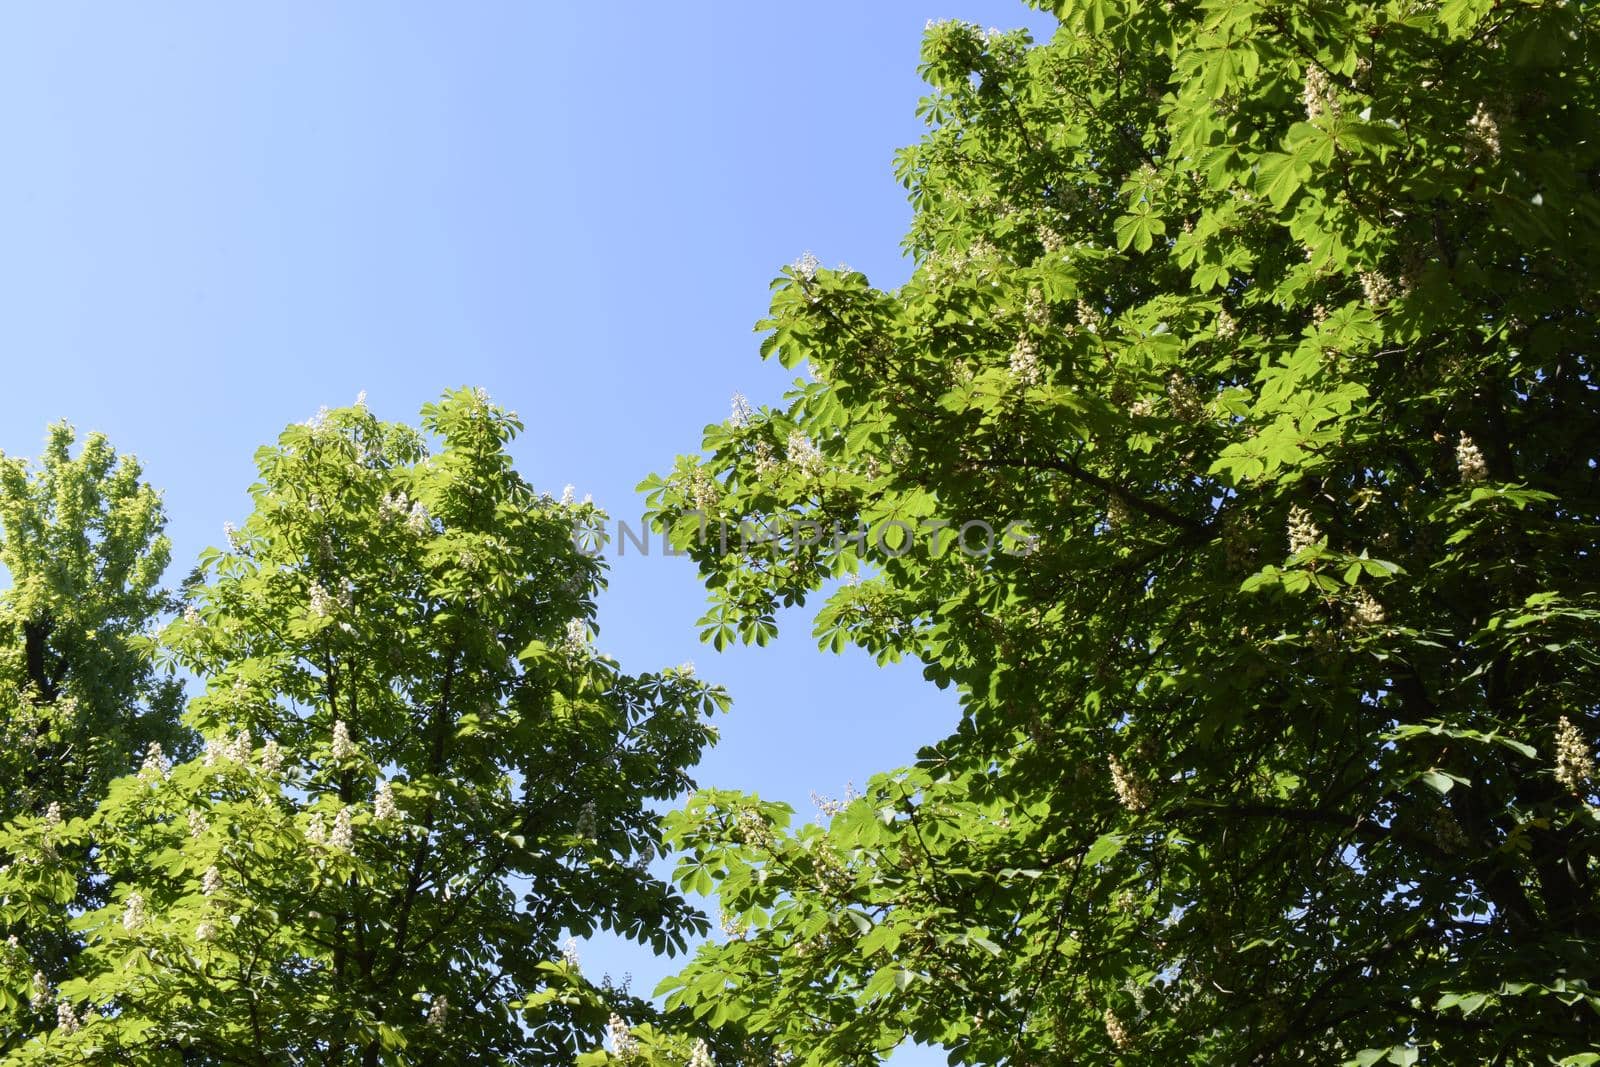 Green leaves against blue sky. Chestnut tree leaves and sun. New life concept, nature background. Copy space.